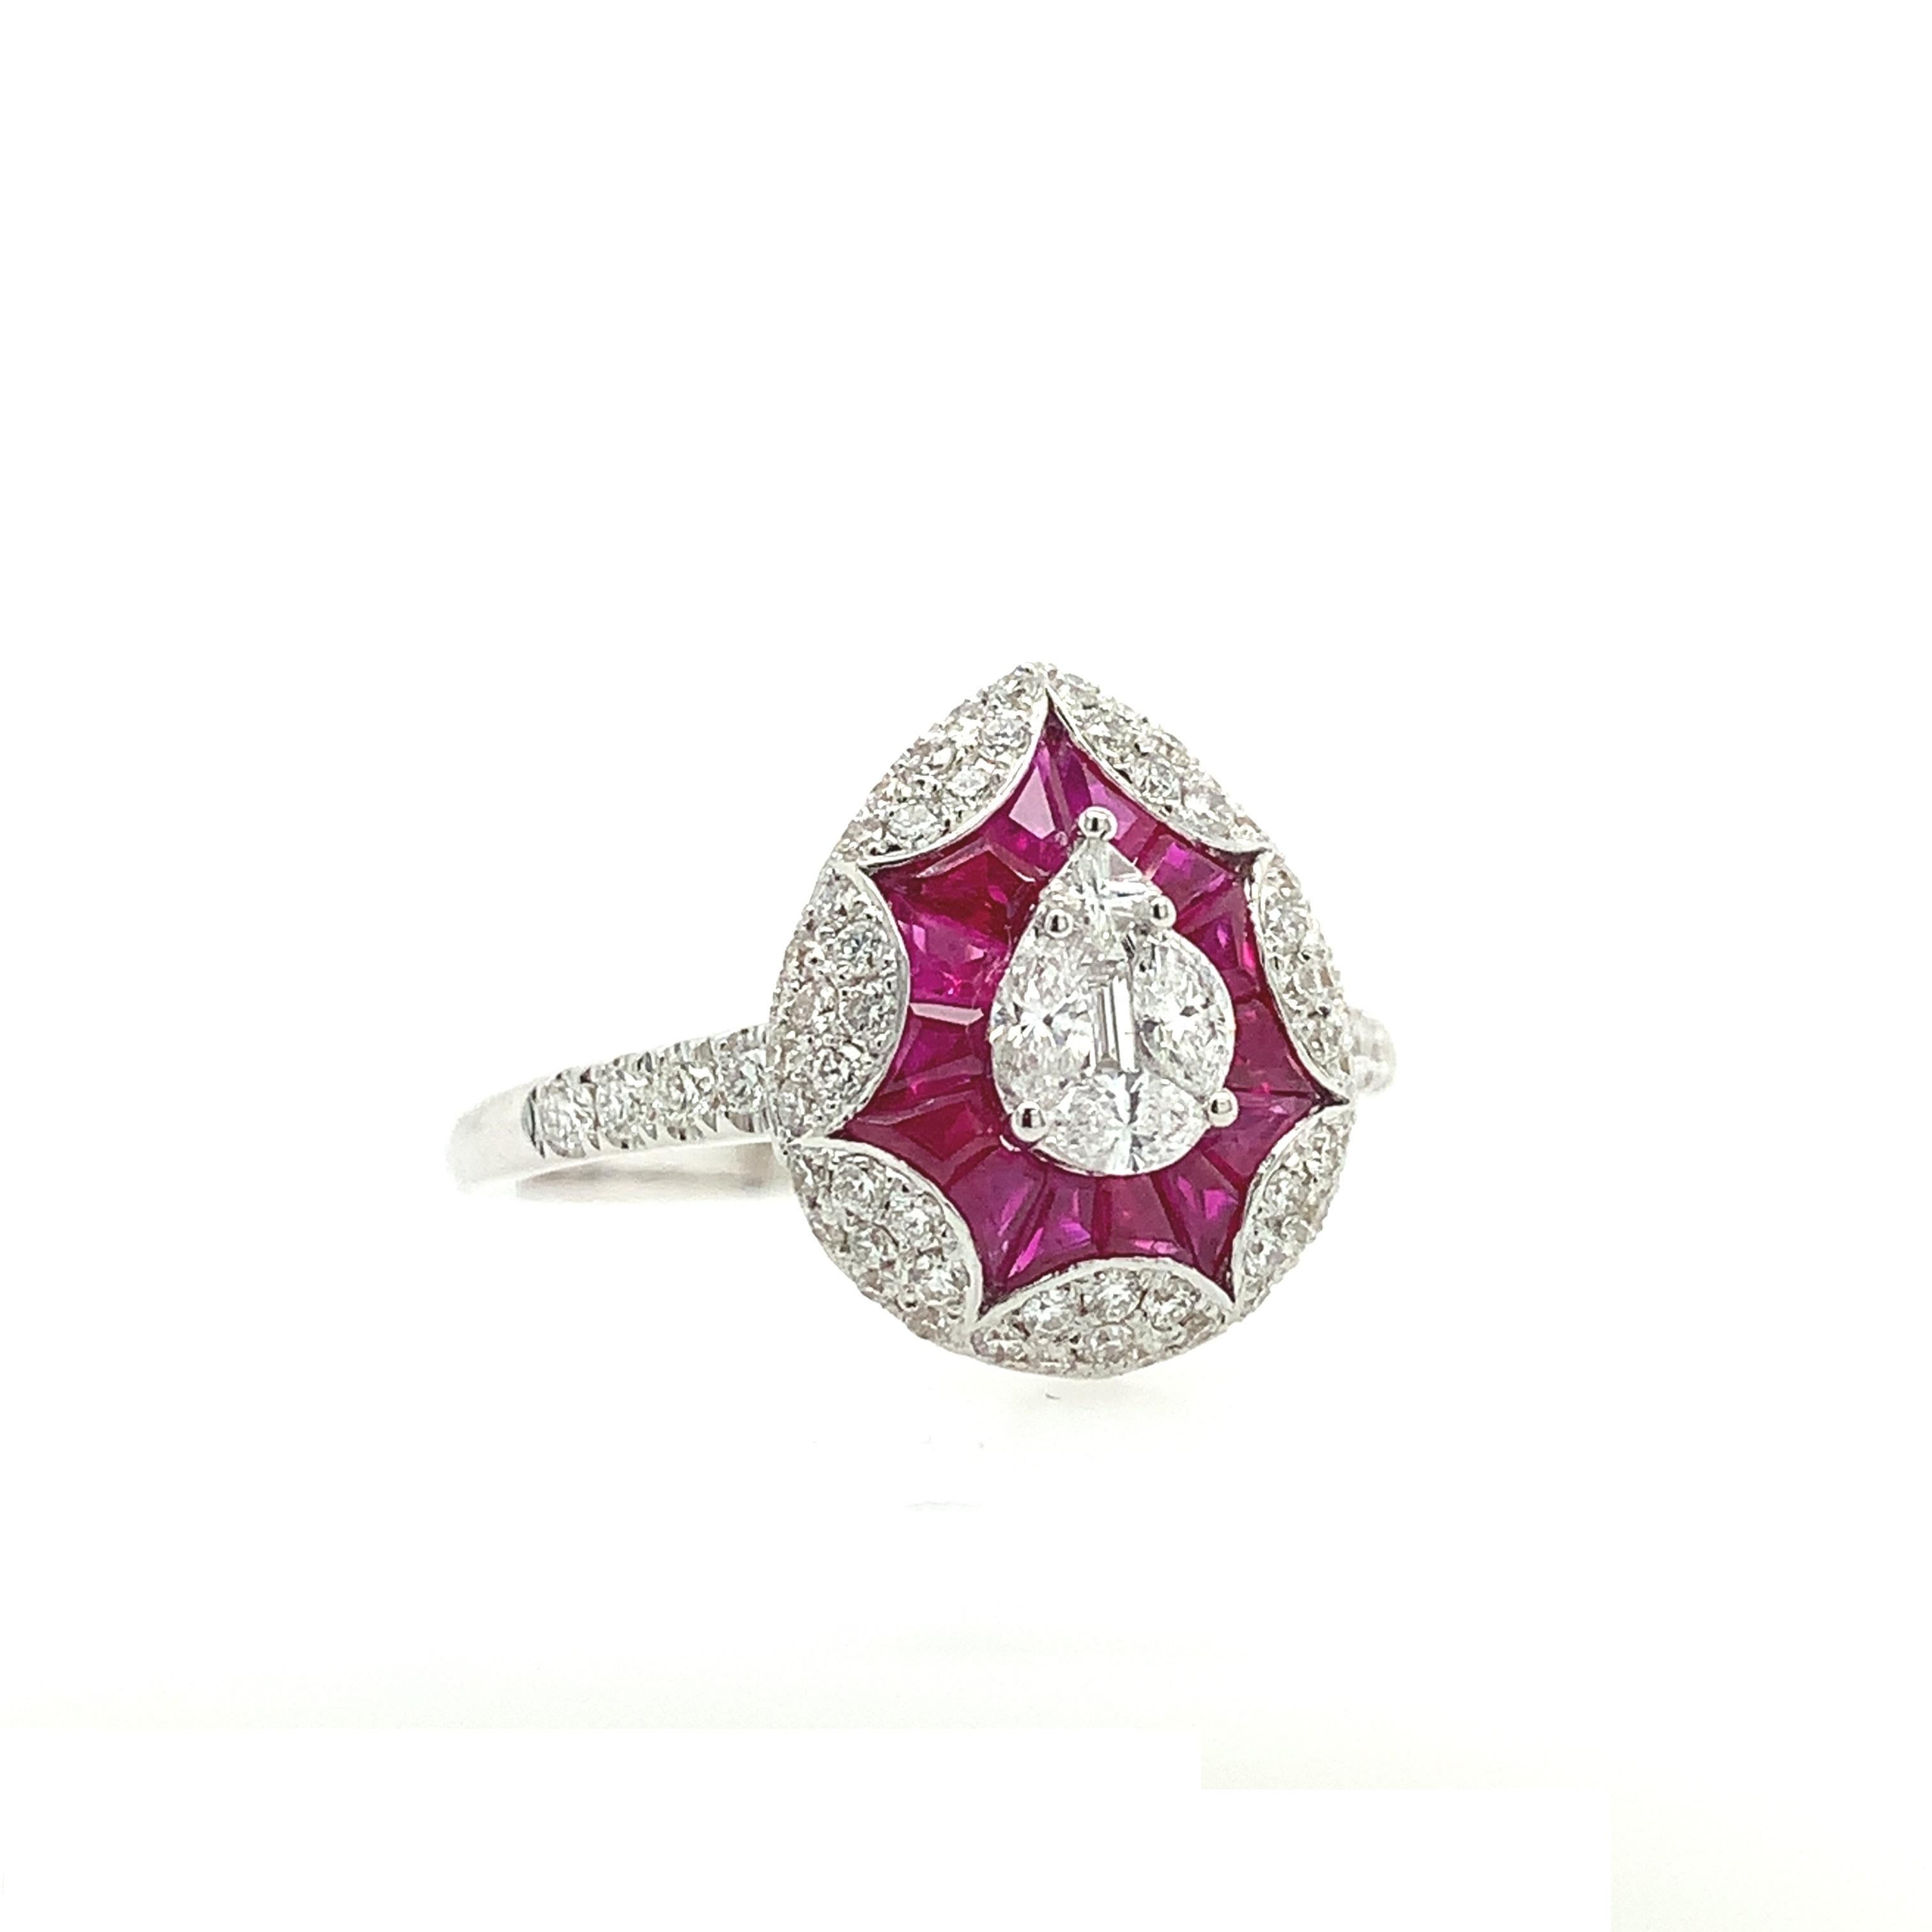 18K White Gold
Diamond- 0.84ct Total Weight
Ruby- 1.70ct Total Weight.
All diamonds are G-H/SI stones.